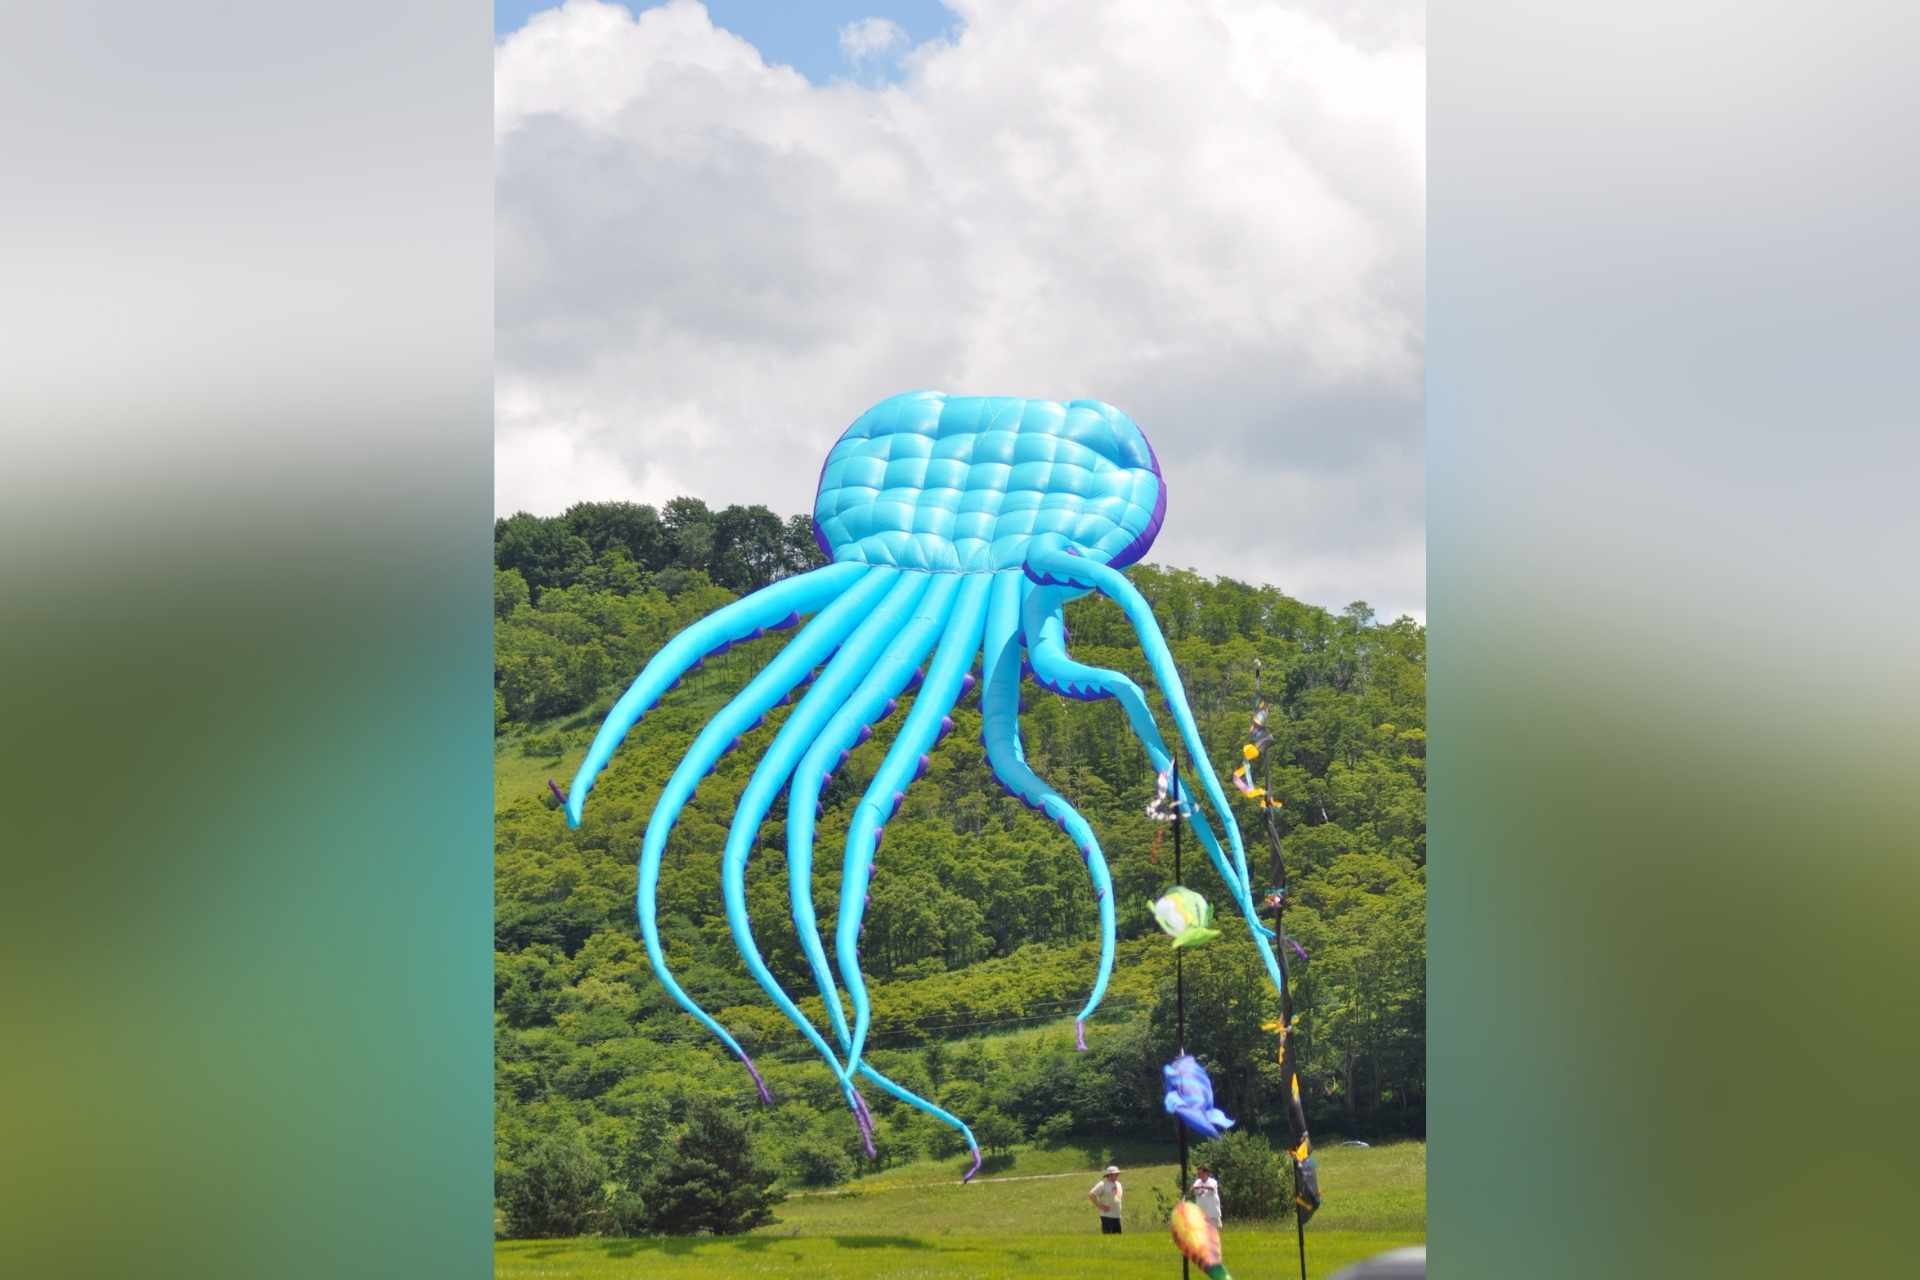 A large “octopus” kite being flown at Canaan Valley Resort.